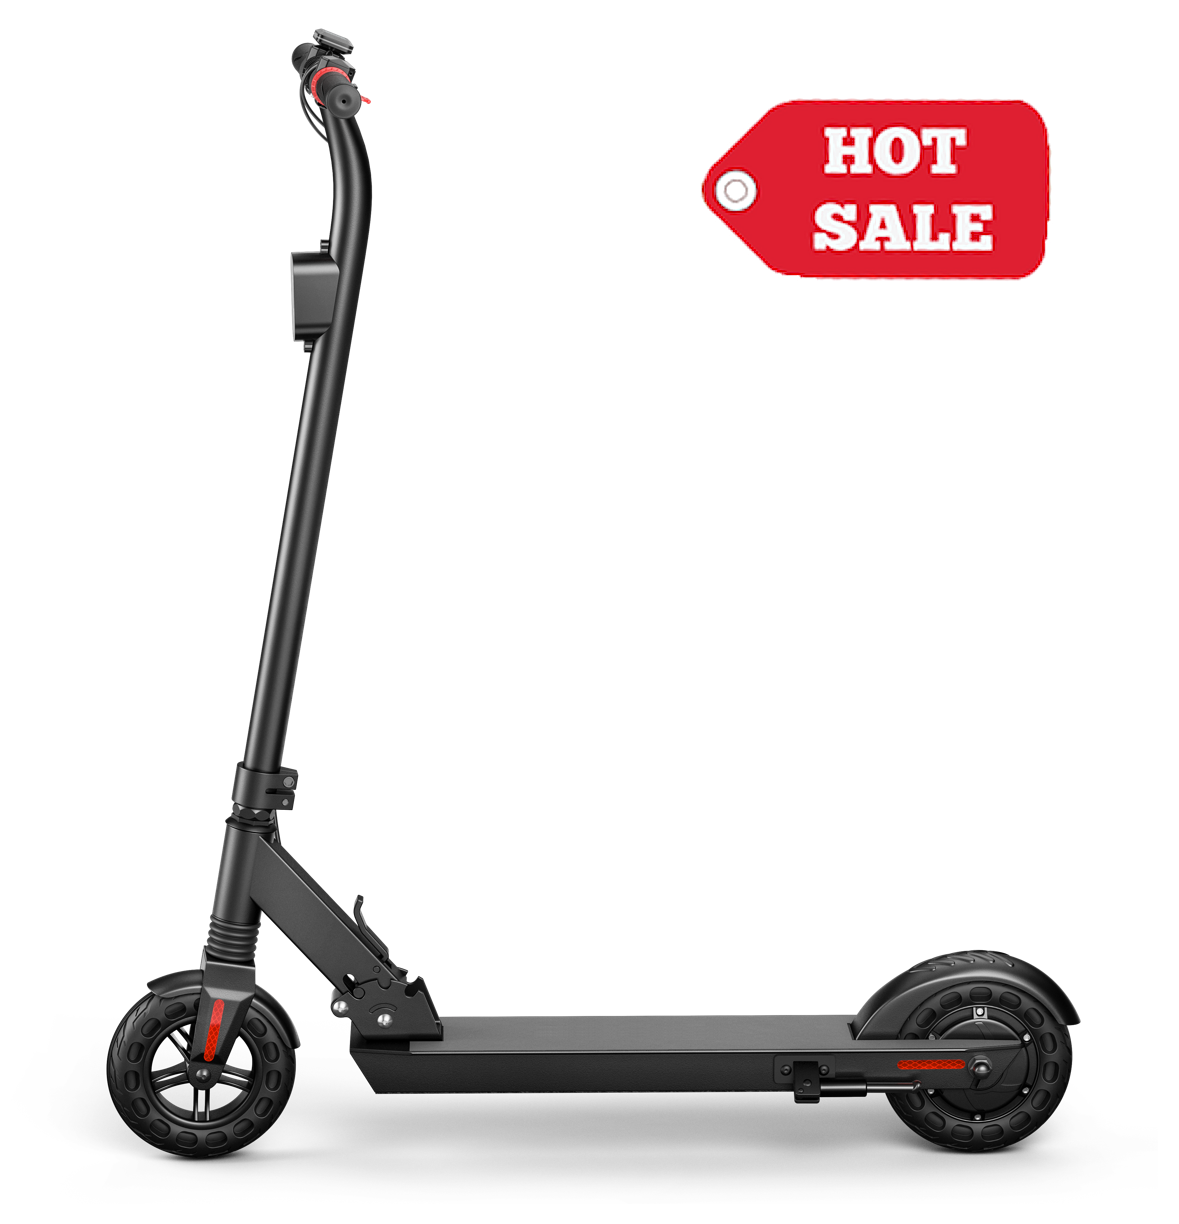 FUNKII FS06A Best Affordable Folding 8" e-scooter